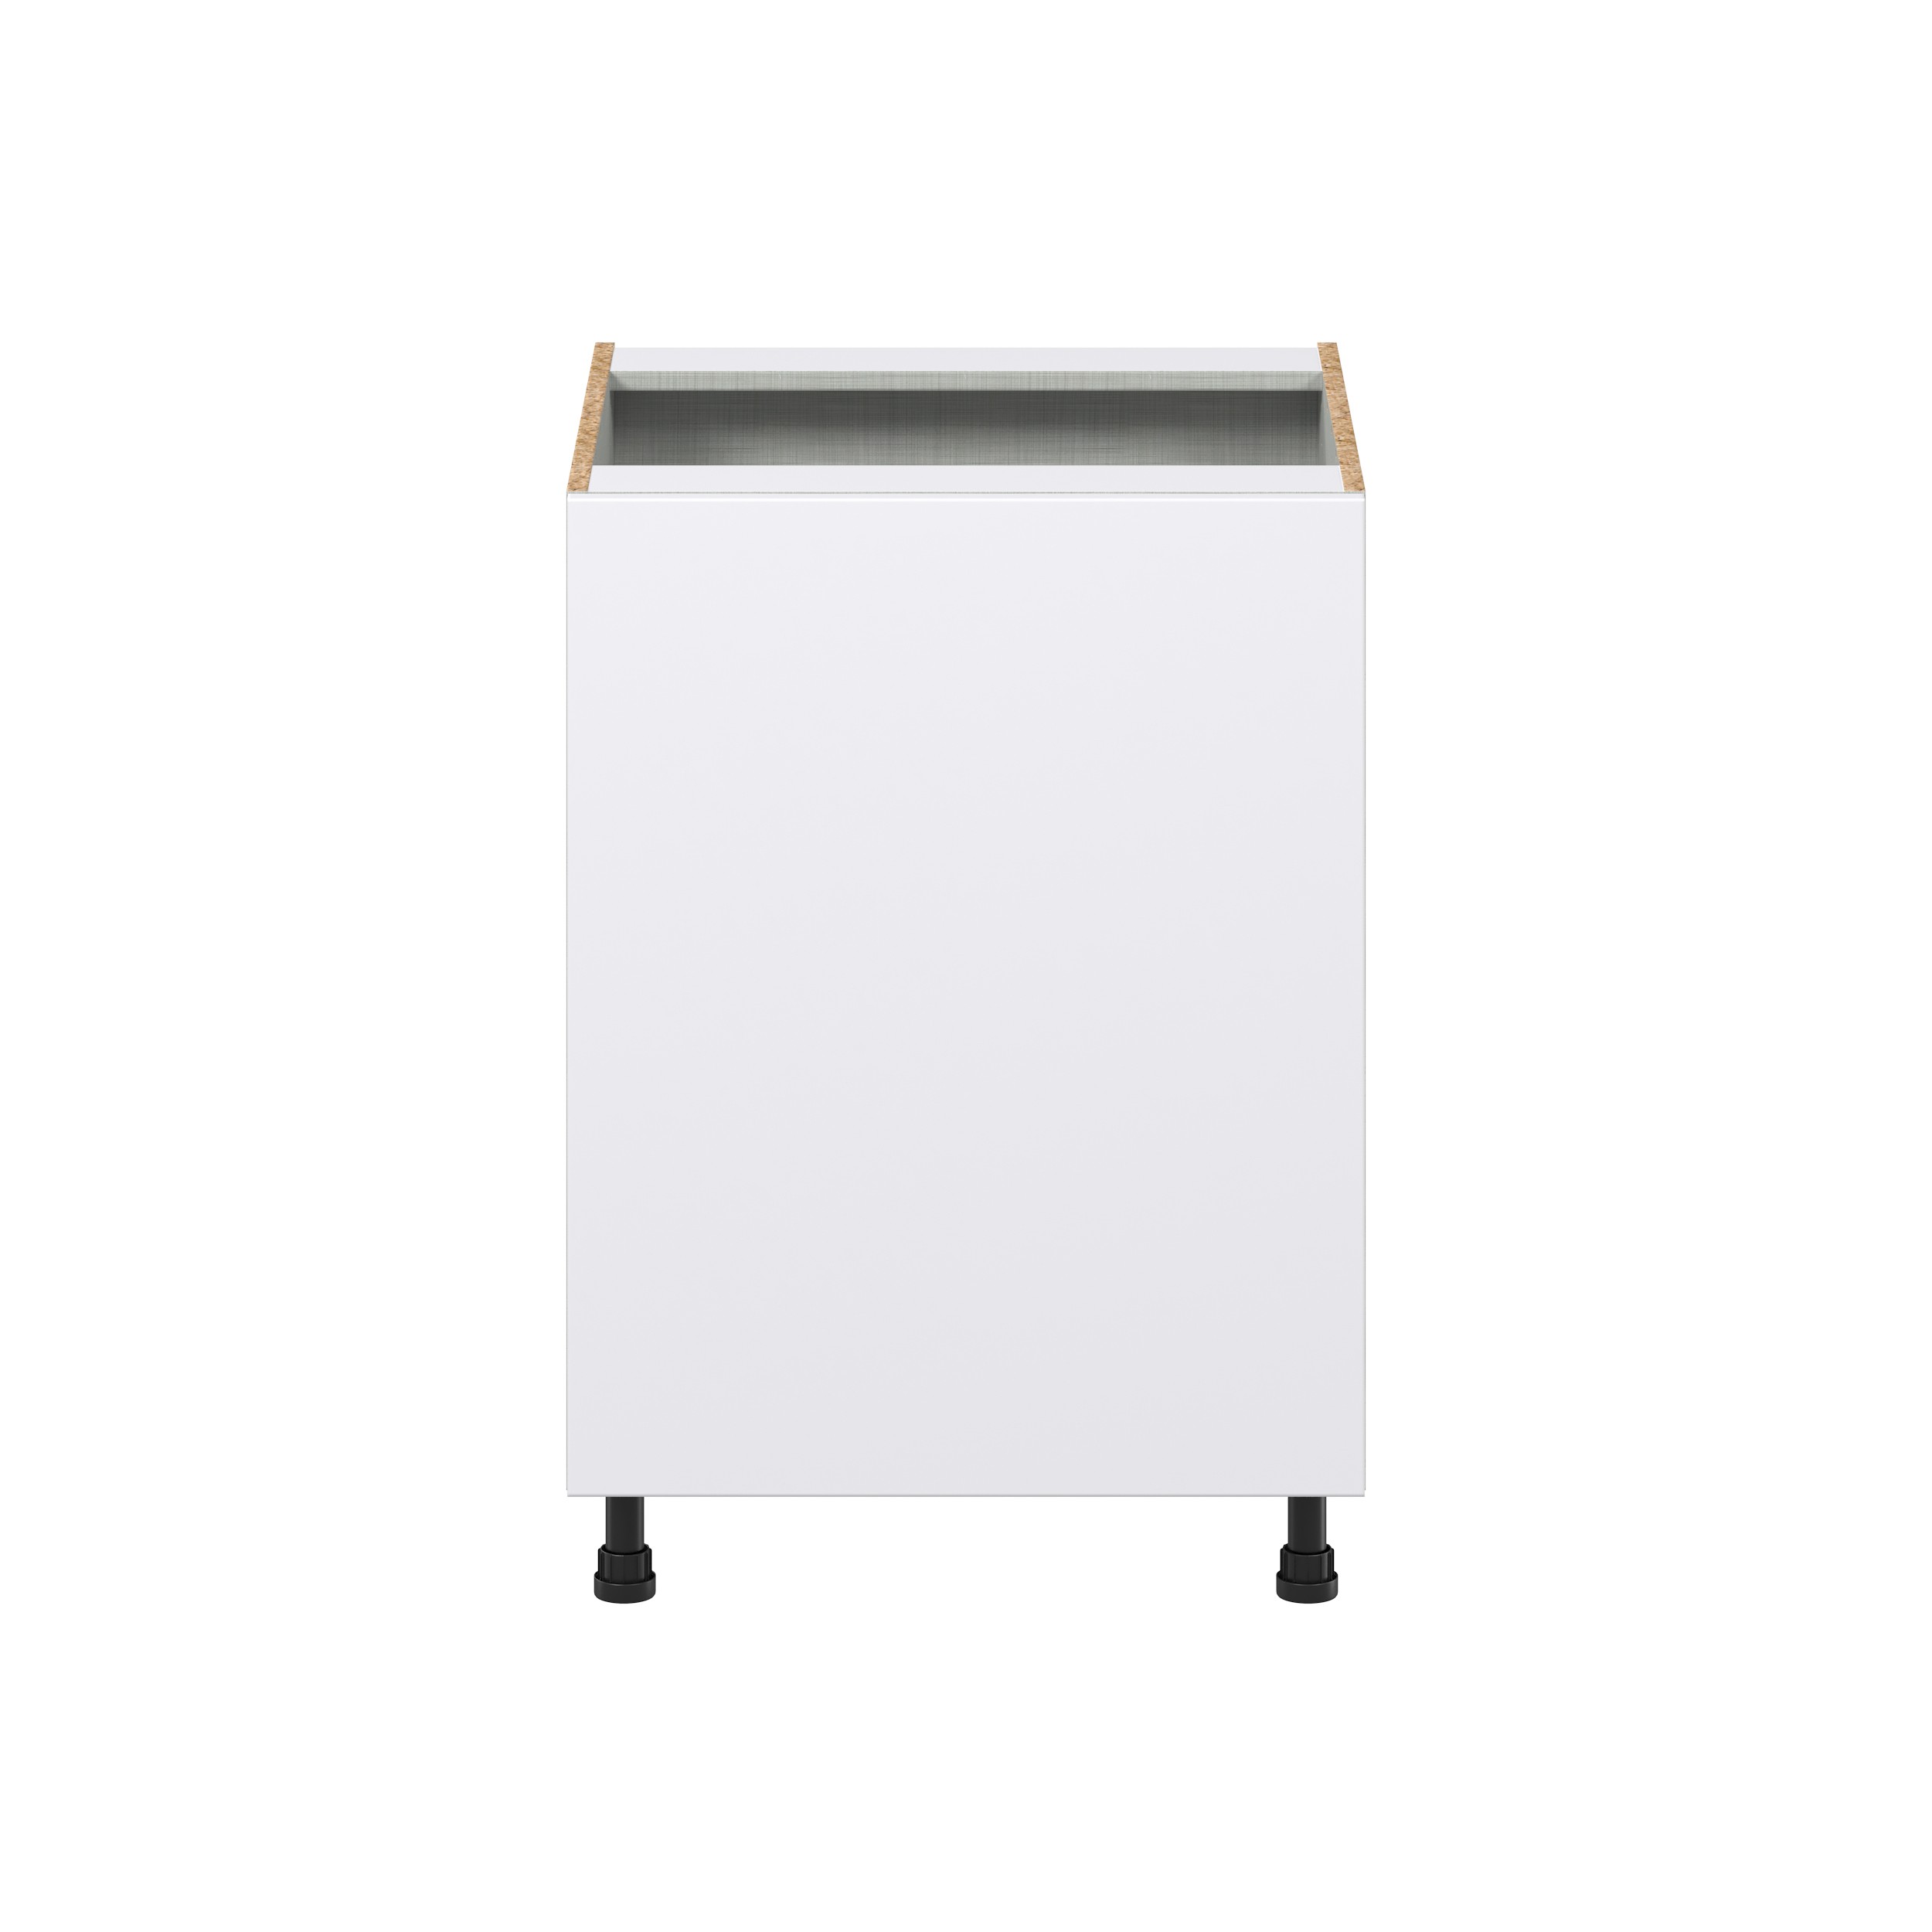 Lily Bright White Slab Assembled Full High Door with Pull Out  3 Waste Bins Kitchen Cabinet (24 in. W x 34.5 in. H x 24 in. D)